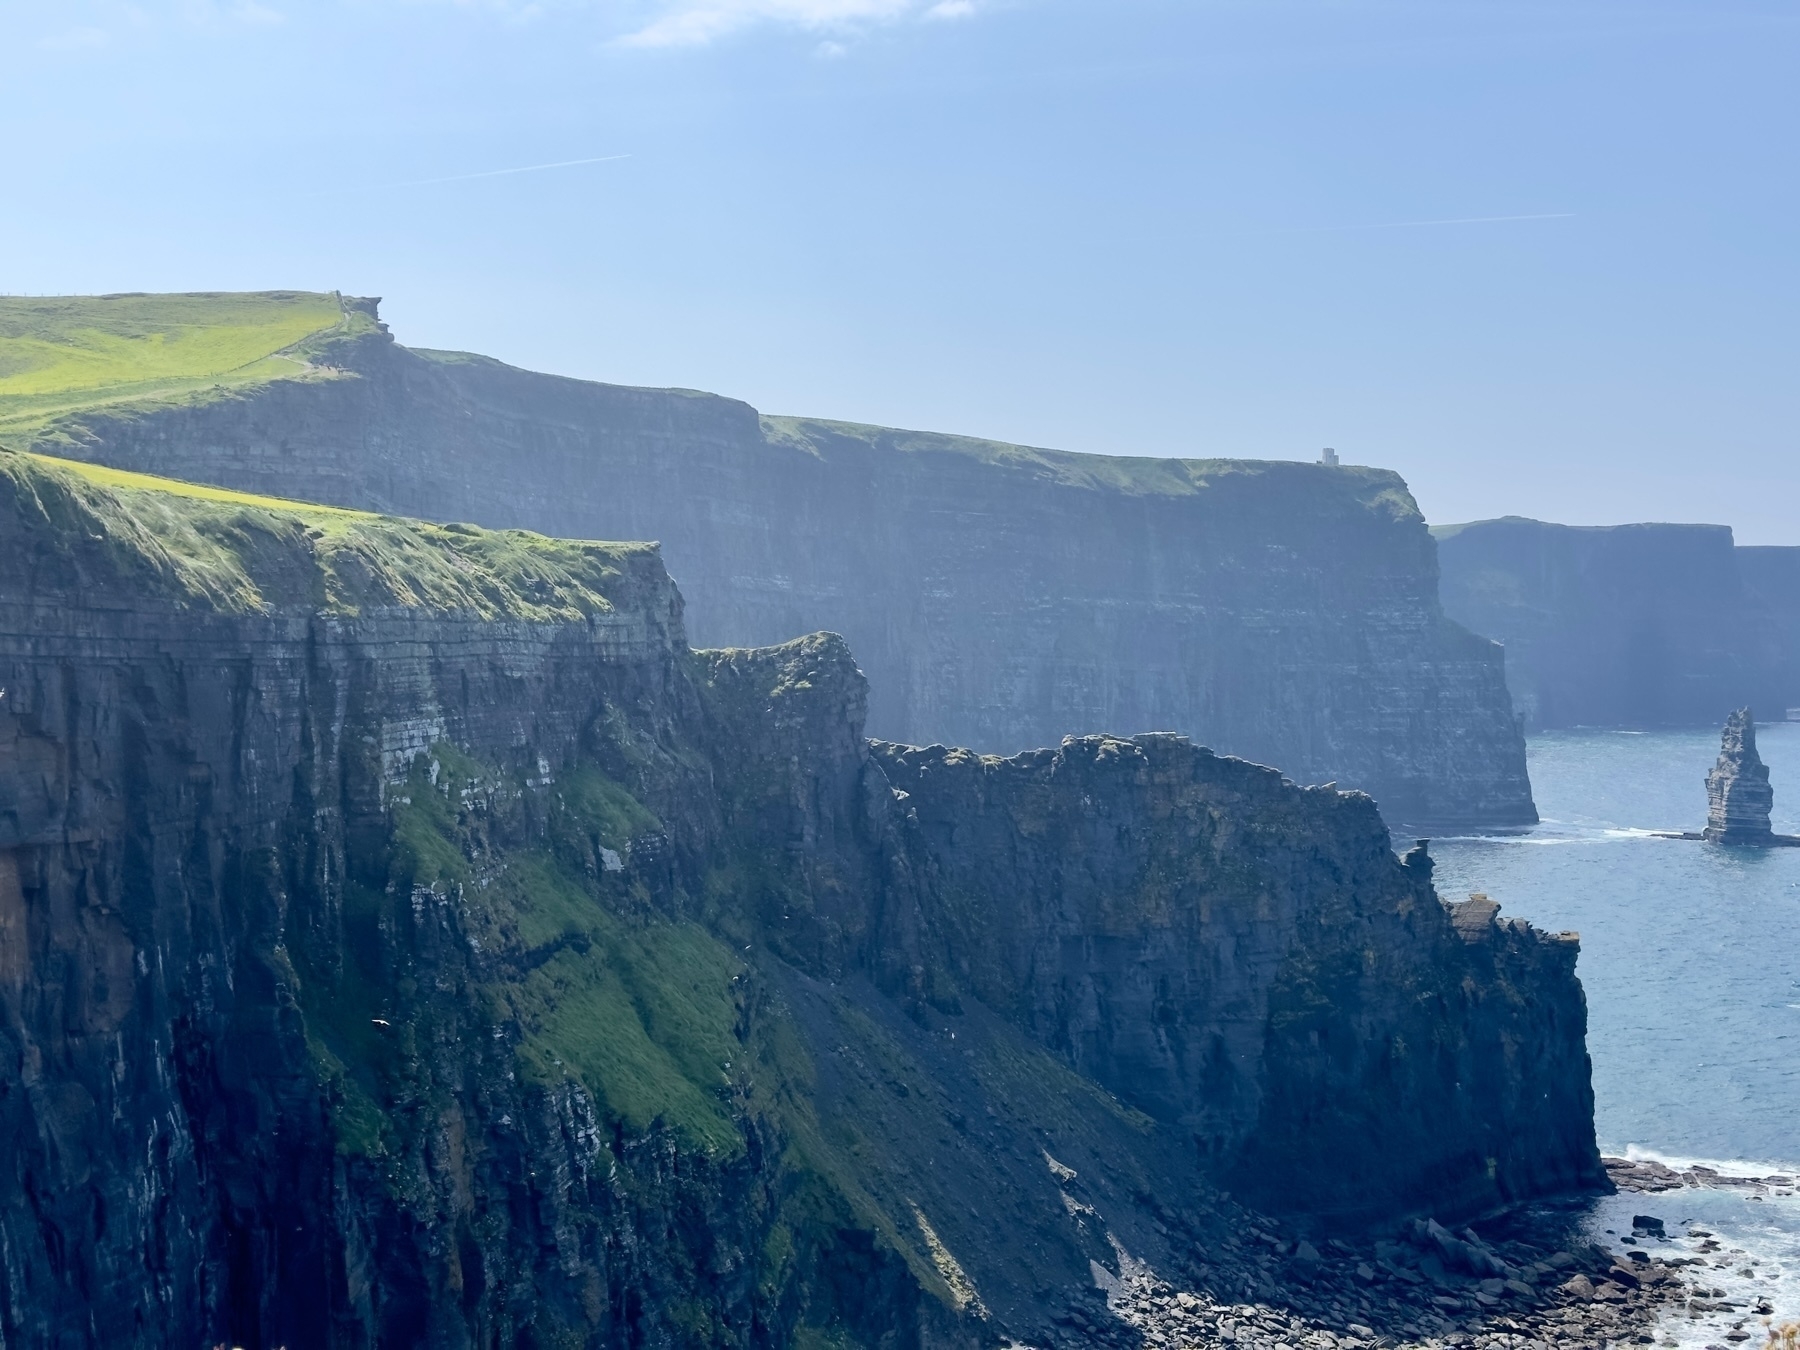 Auto-generated description: Majestic sea cliffs, covered in lush green grass, rise dramatically above the ocean, with rocky outcrops and a faint blue sky in the backdrop.